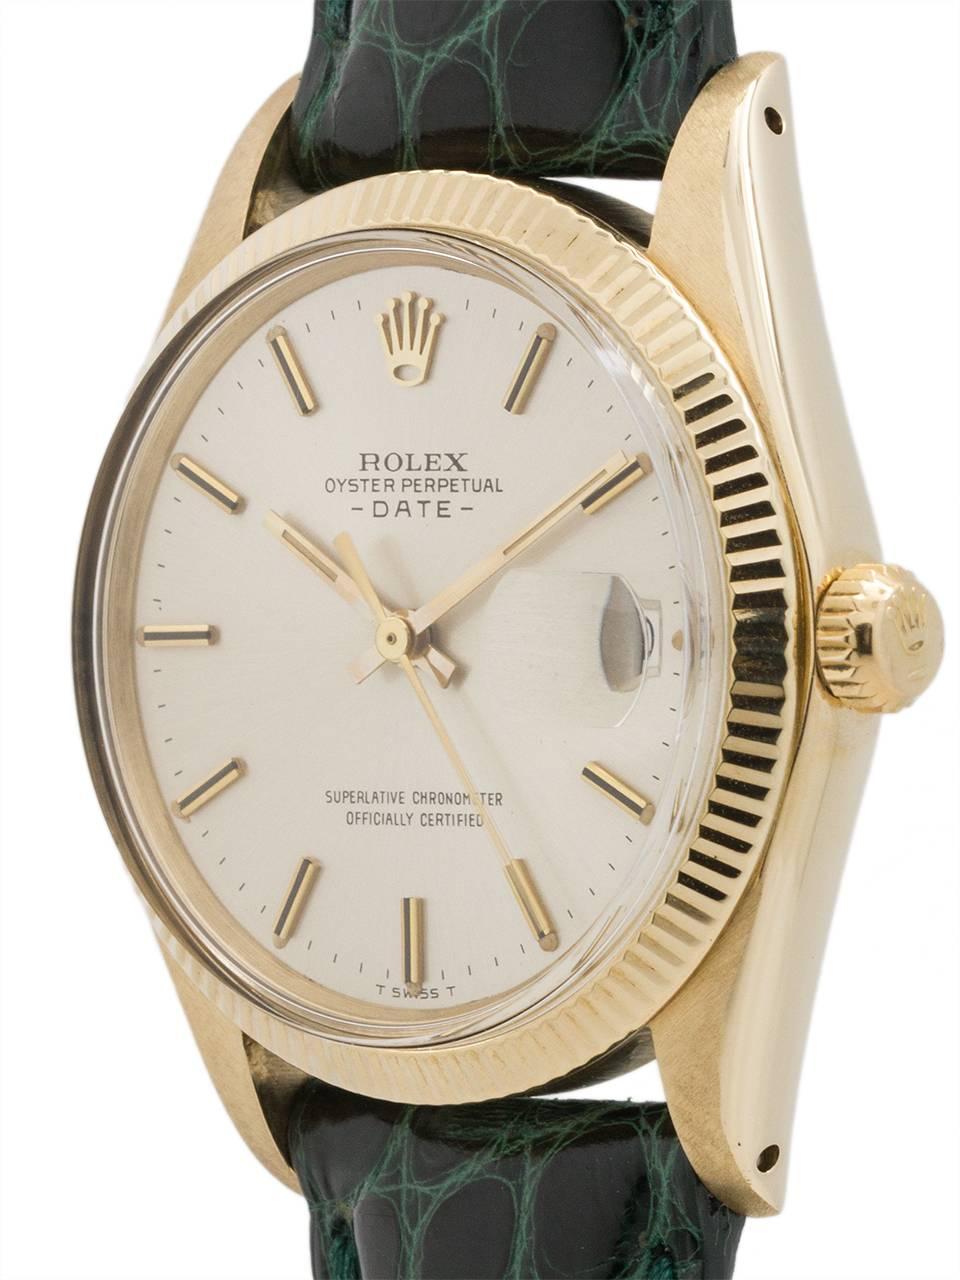 
Vintage Rolex Oyster Perpetual Date ref# 1503 serial # 3.0 million circa 1972. Featuring 34mm diameter case with fine milled bezel, acrylic crystal, and very pleasing original silvered dial with applied gold indexes and gilt baton hands. Powered by